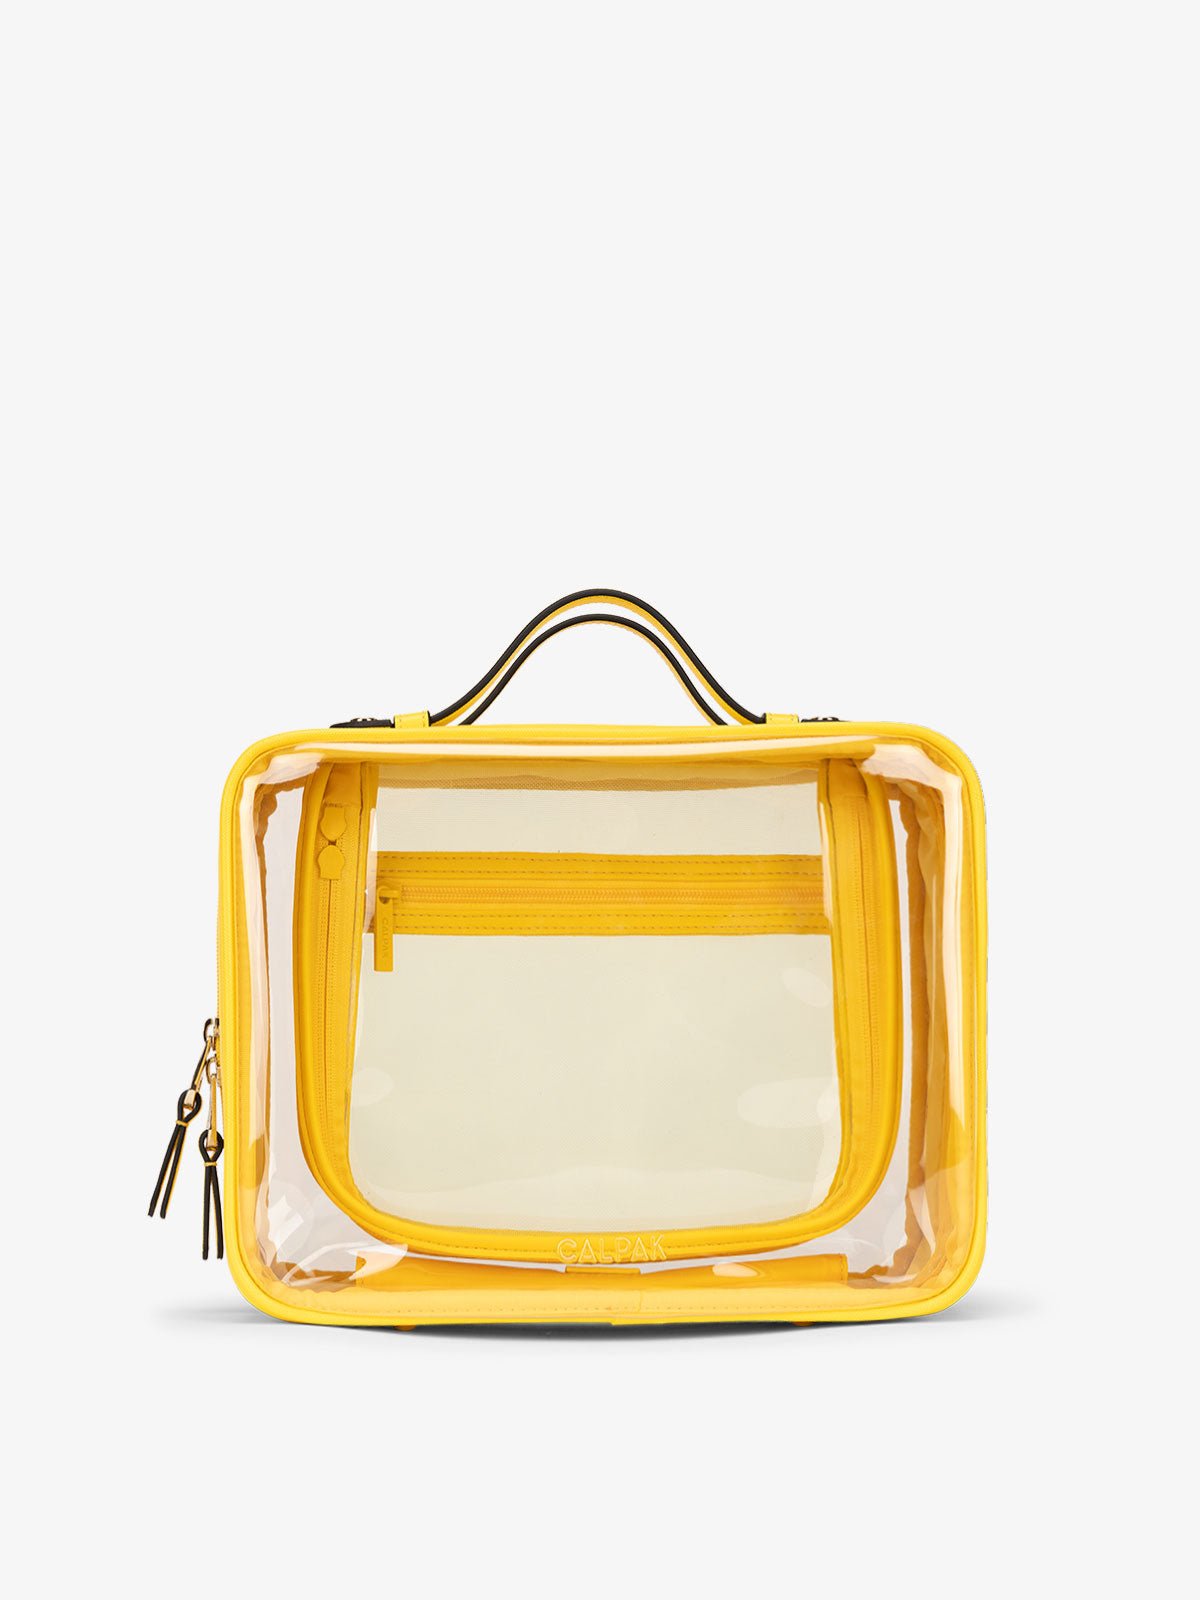 CALPAK Large clear makeup bag with zippered compartments in yellow lemon